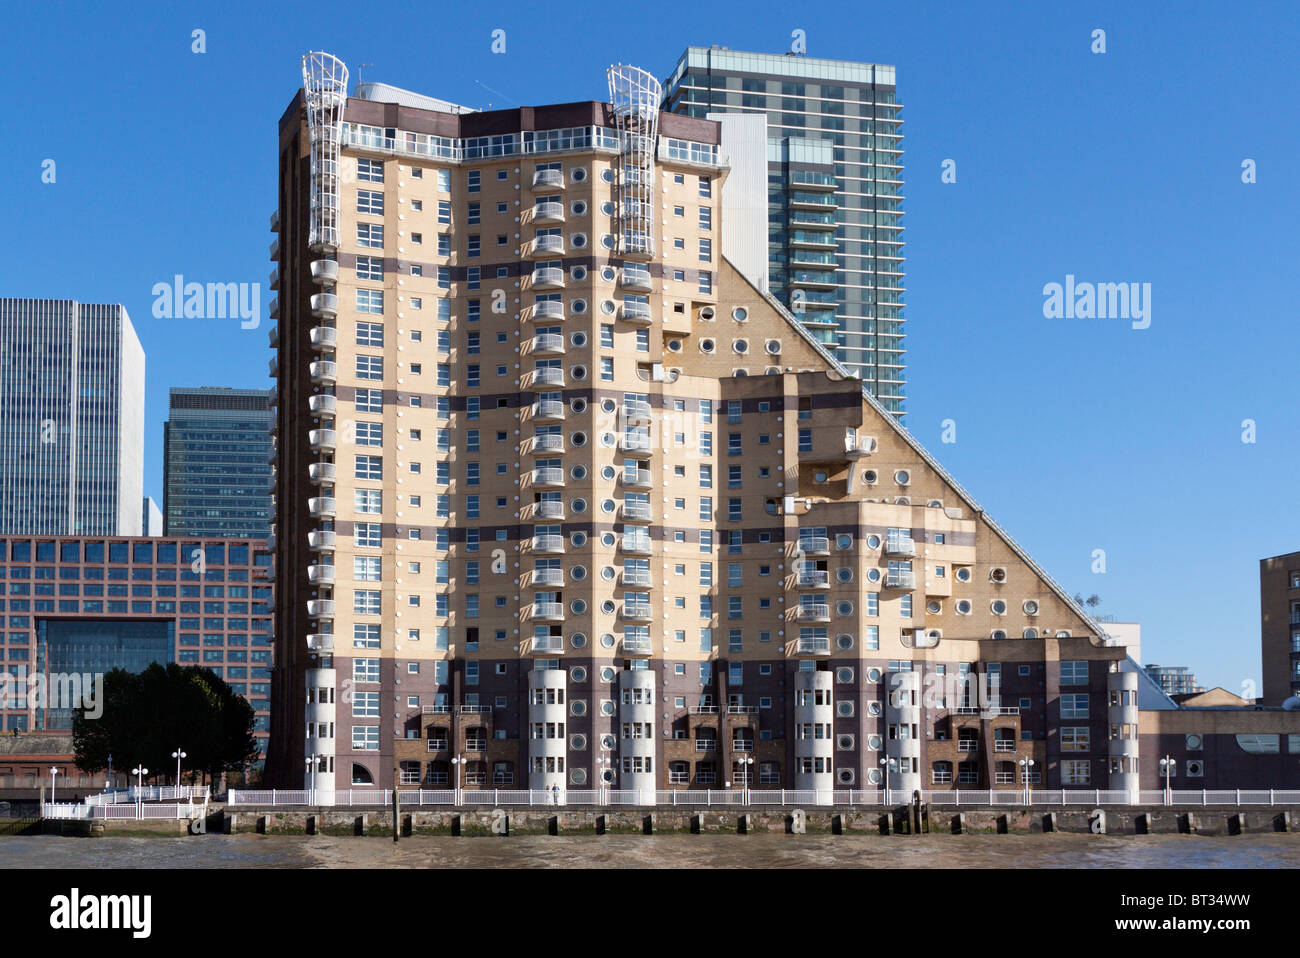 The Cascades - Apartments - Docklands - London Stock Photo